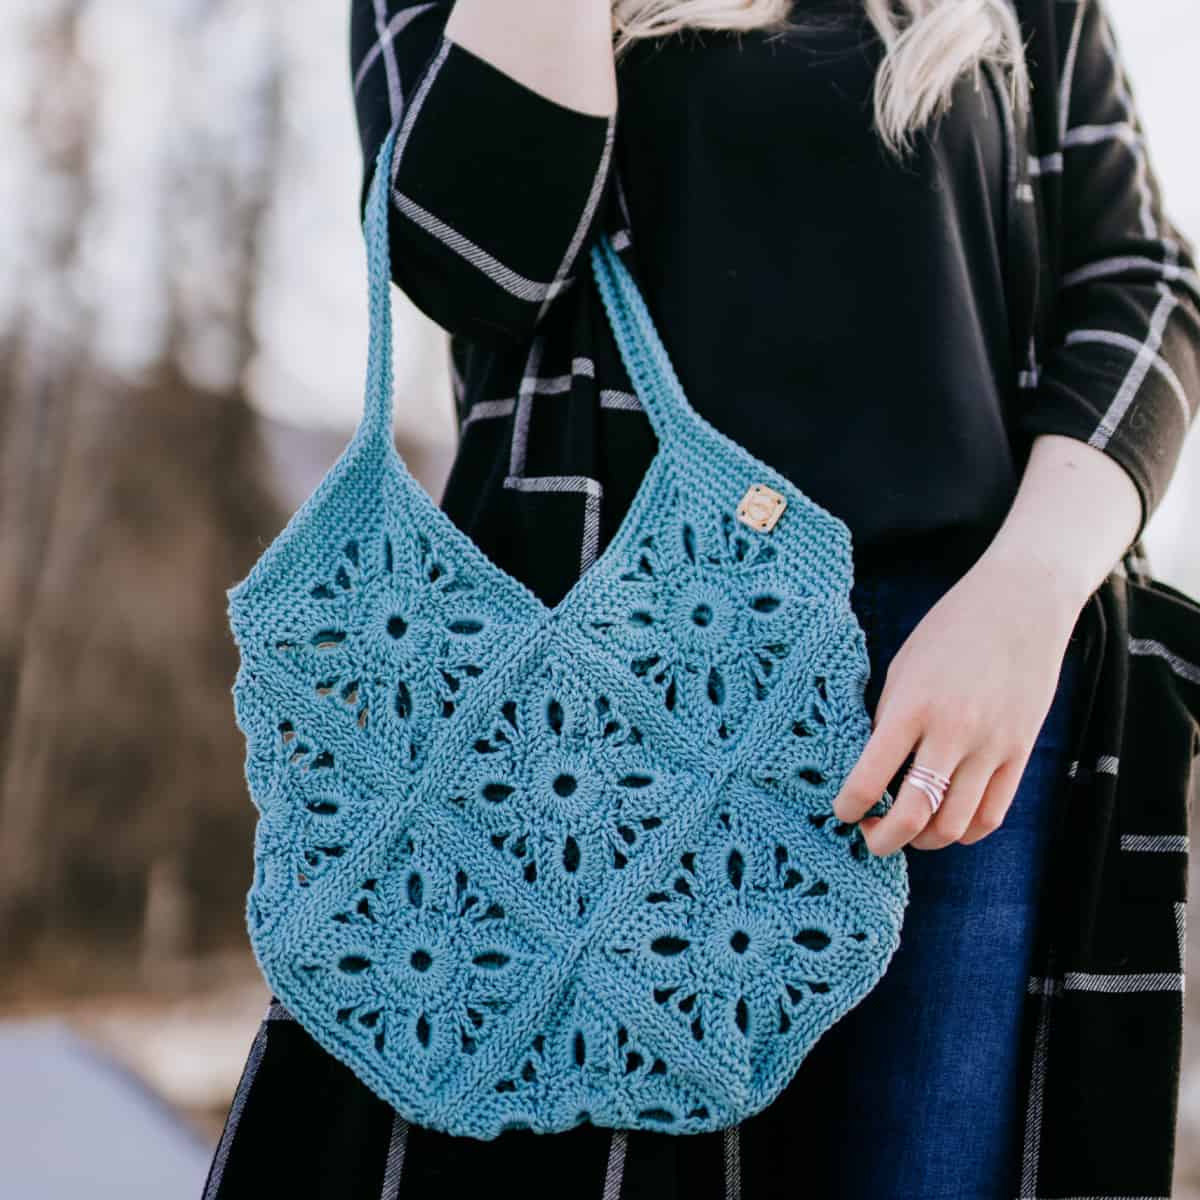 New market bag made from my clearance haul of Mandala yarn! One skein makes  a generous tote bag for only $2.50! This particular skein was called “Wood  Nymph” : r/crochet